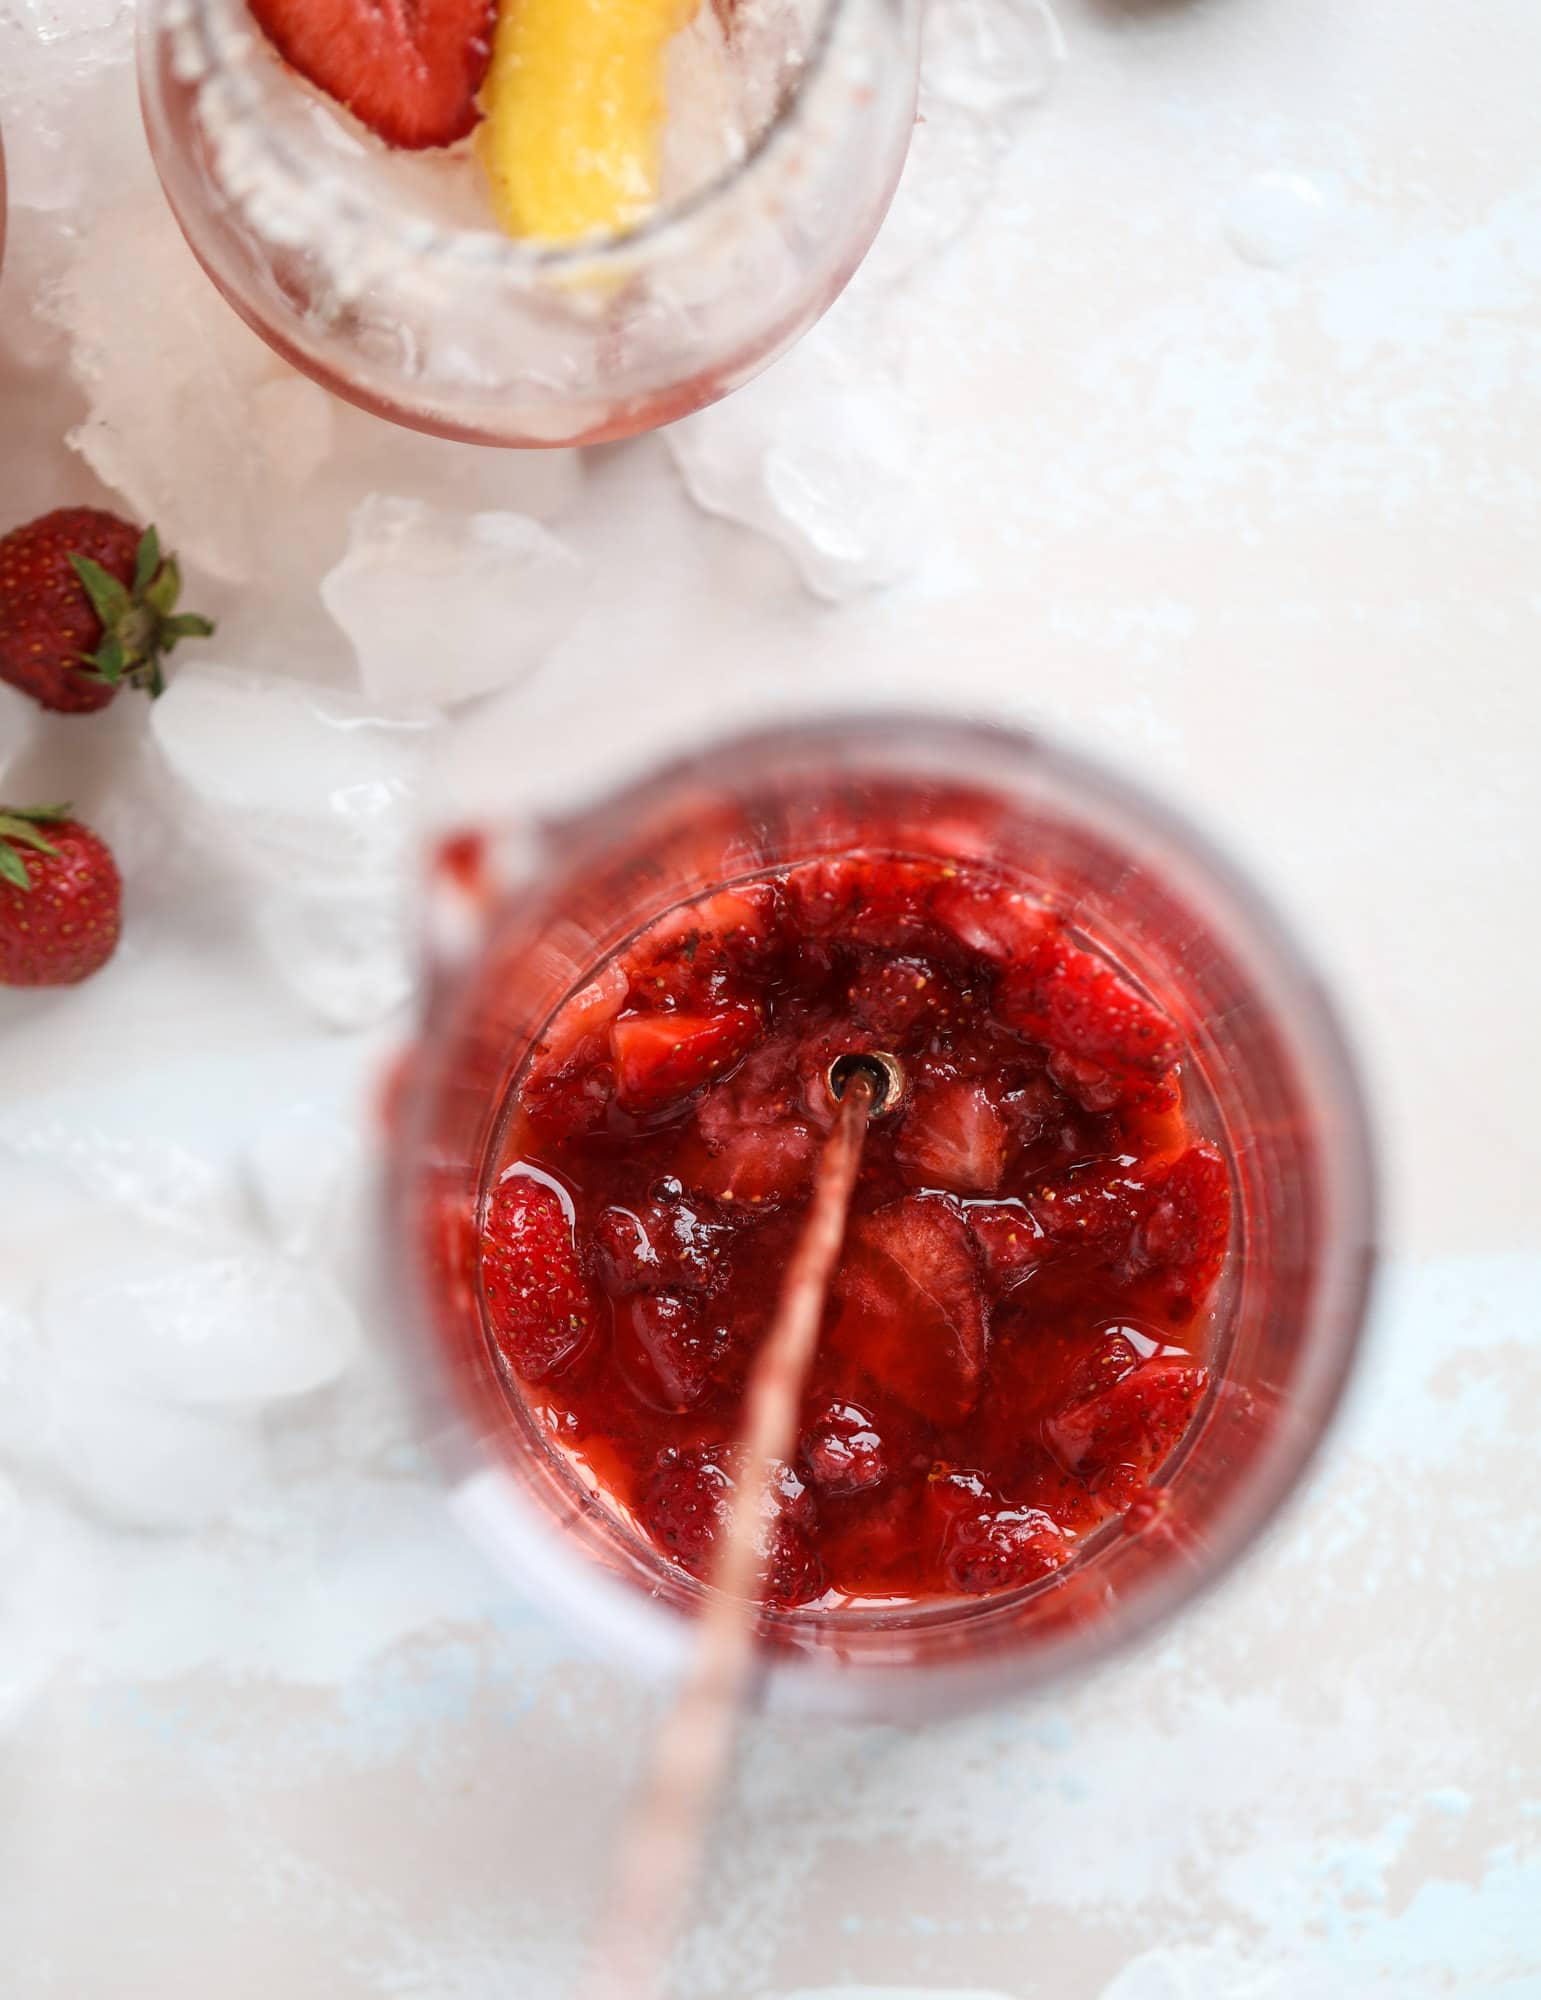 This tequila rosé spritz cocktail is perfectly refreshing for hot summer nights. A mix between a margarita and spritzer, this starts with muddled strawberries and honey, a shot of tequila and is topped off with your favorite rosé wine! I howsweeteats.com #tequila #rosé #wine #spritz #cocktail #strawberries